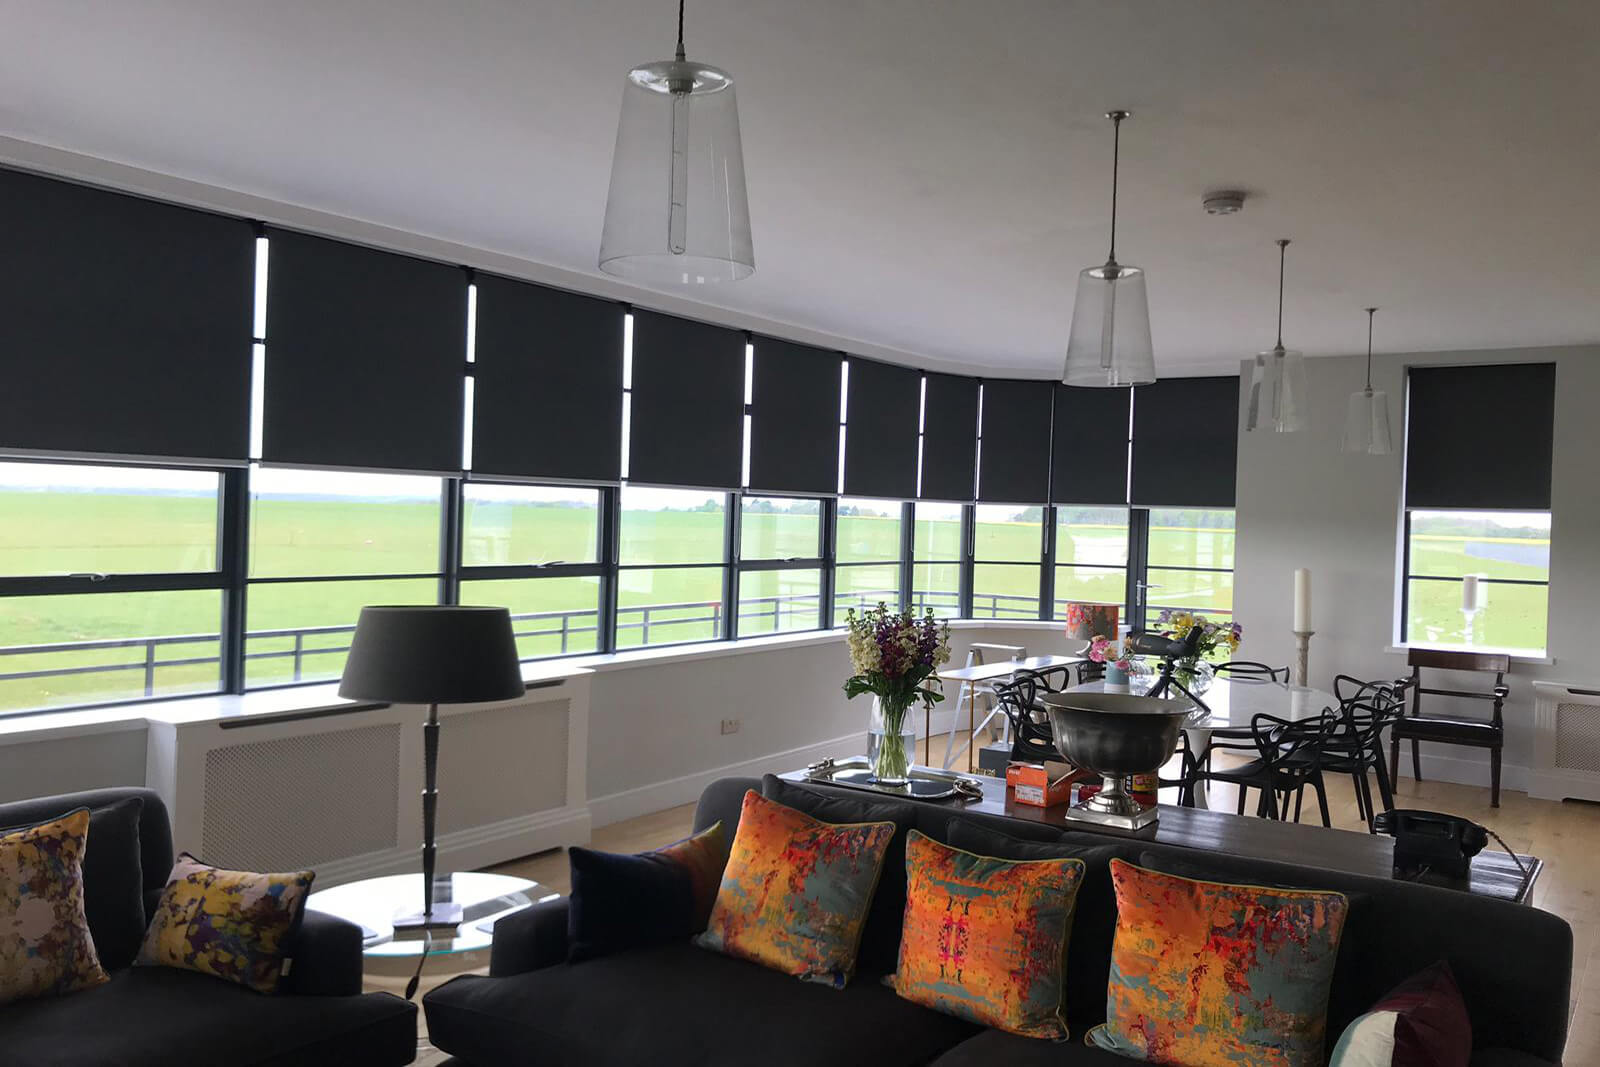 Flame Retardant Roller Blinds For Commercial Use Sutton-In-Ashfield